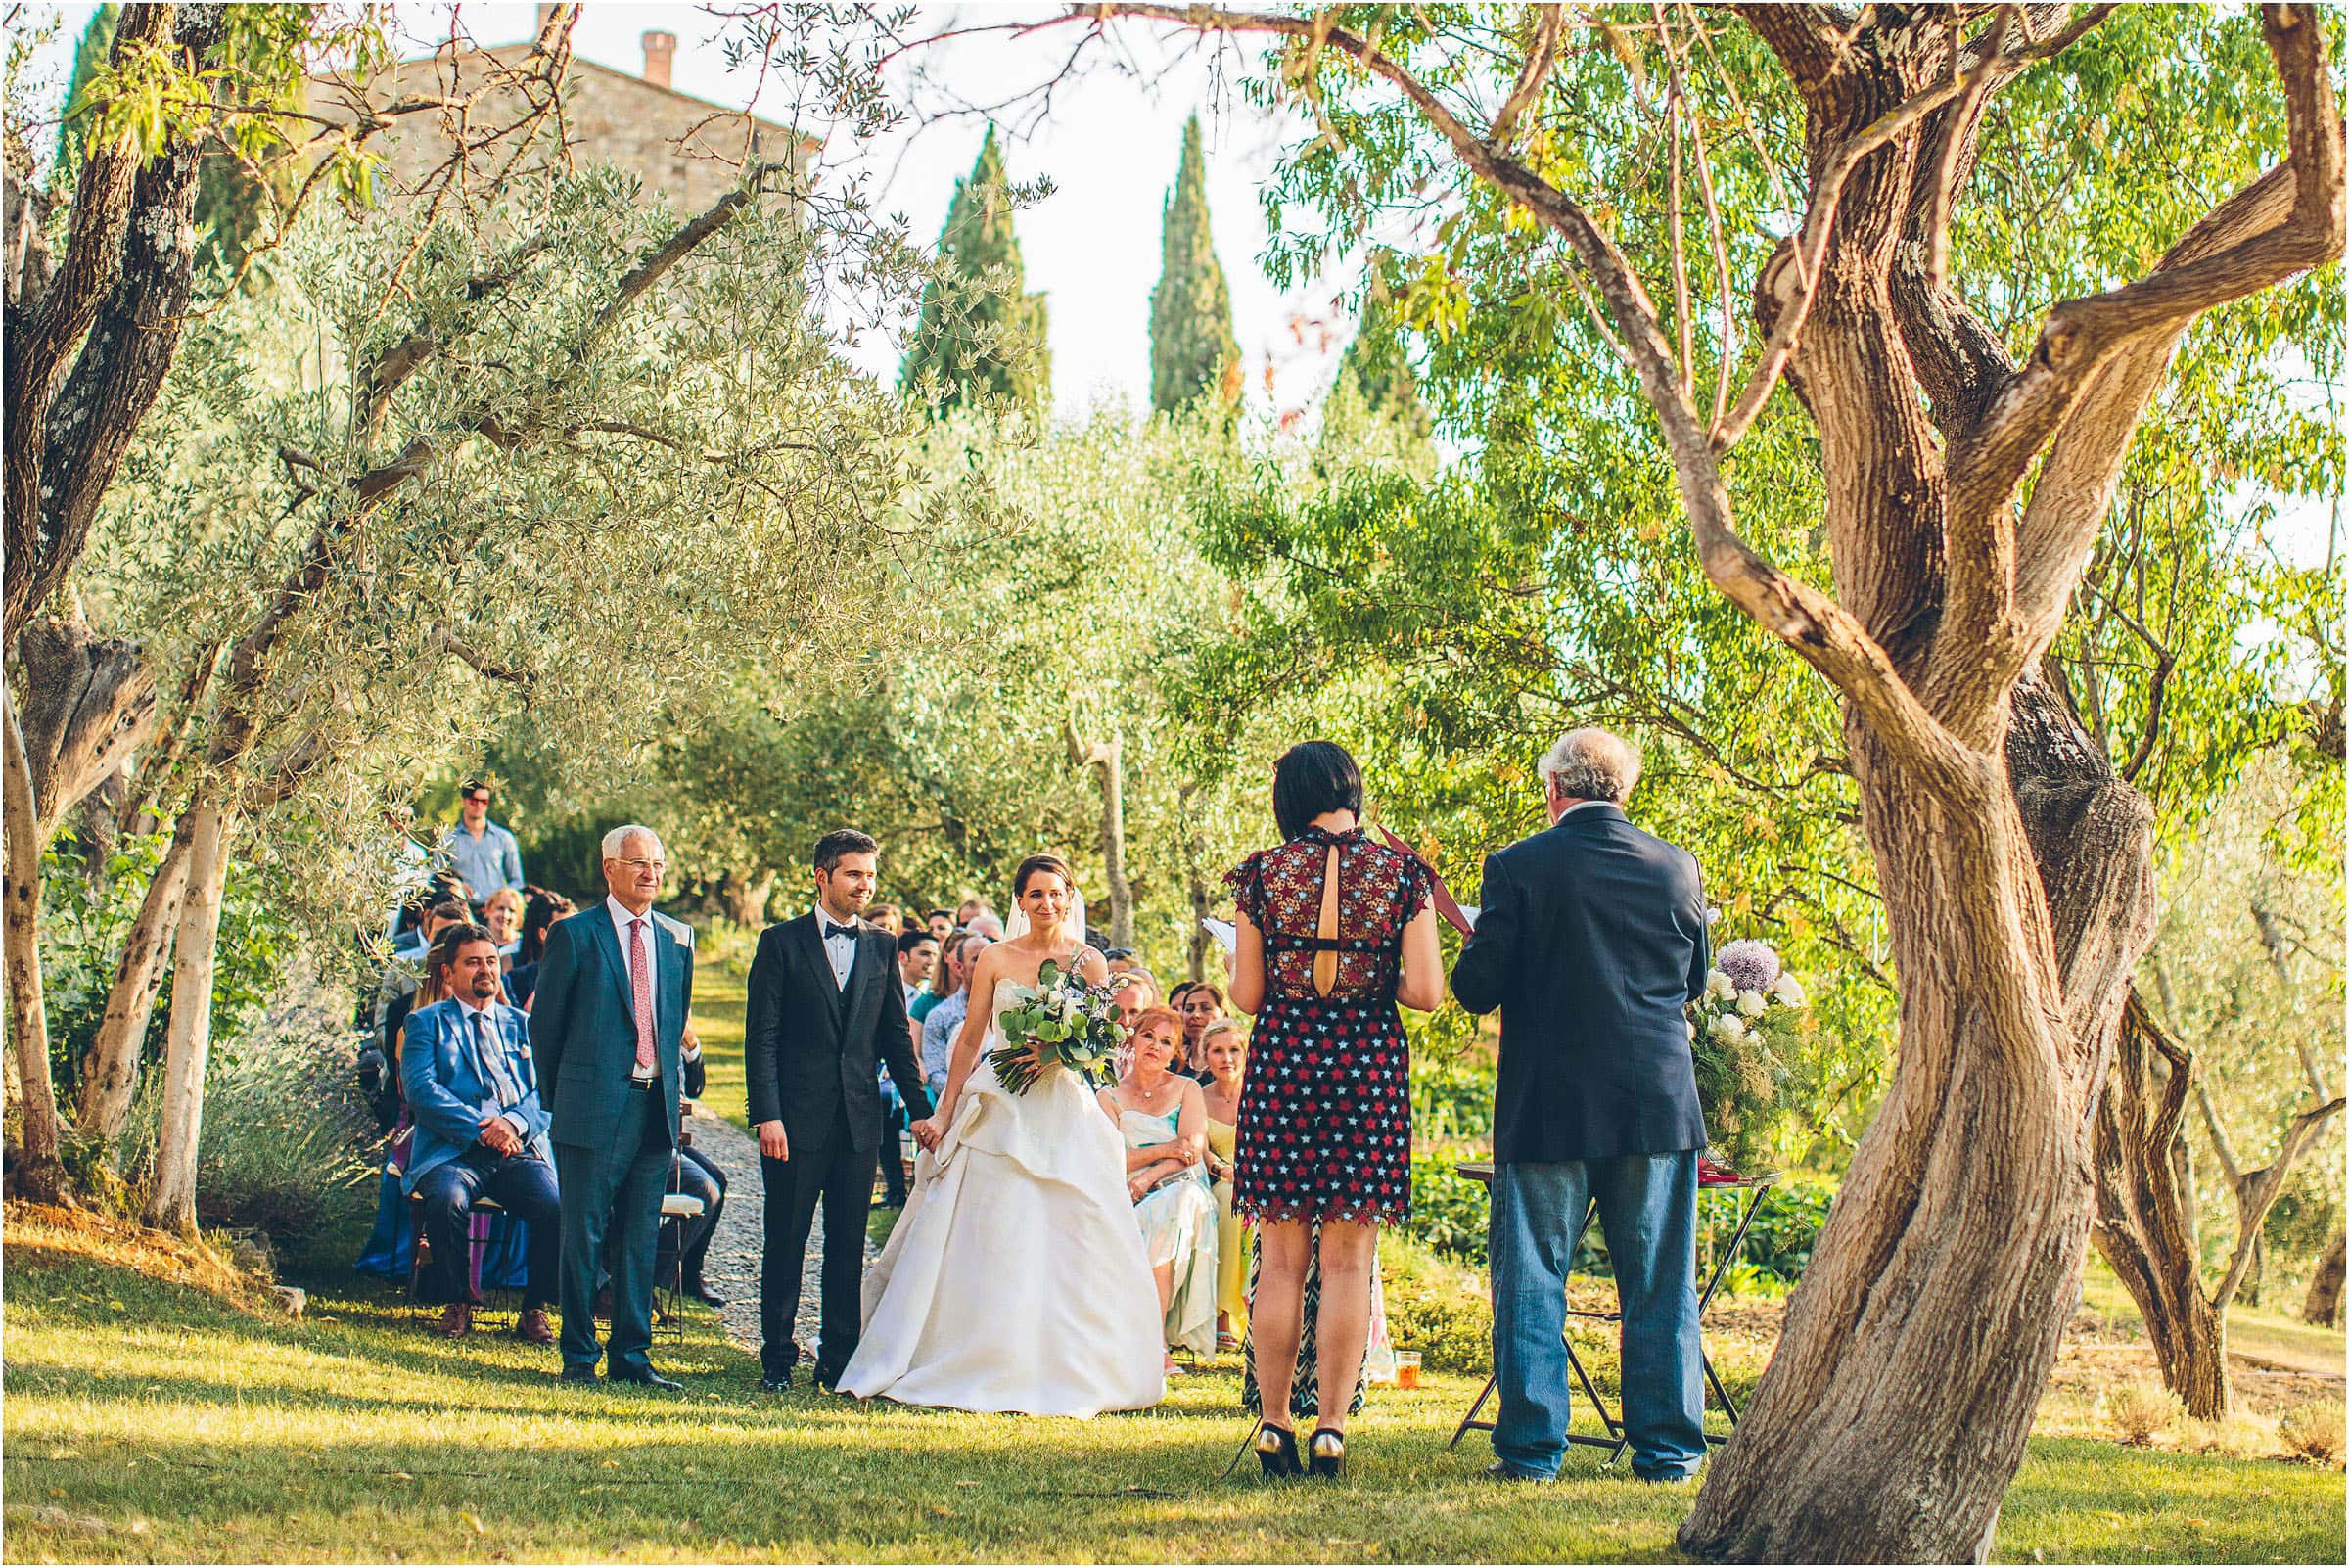 A beautiful shot of a couple getting married at Castello di Vicarello in Tuscany